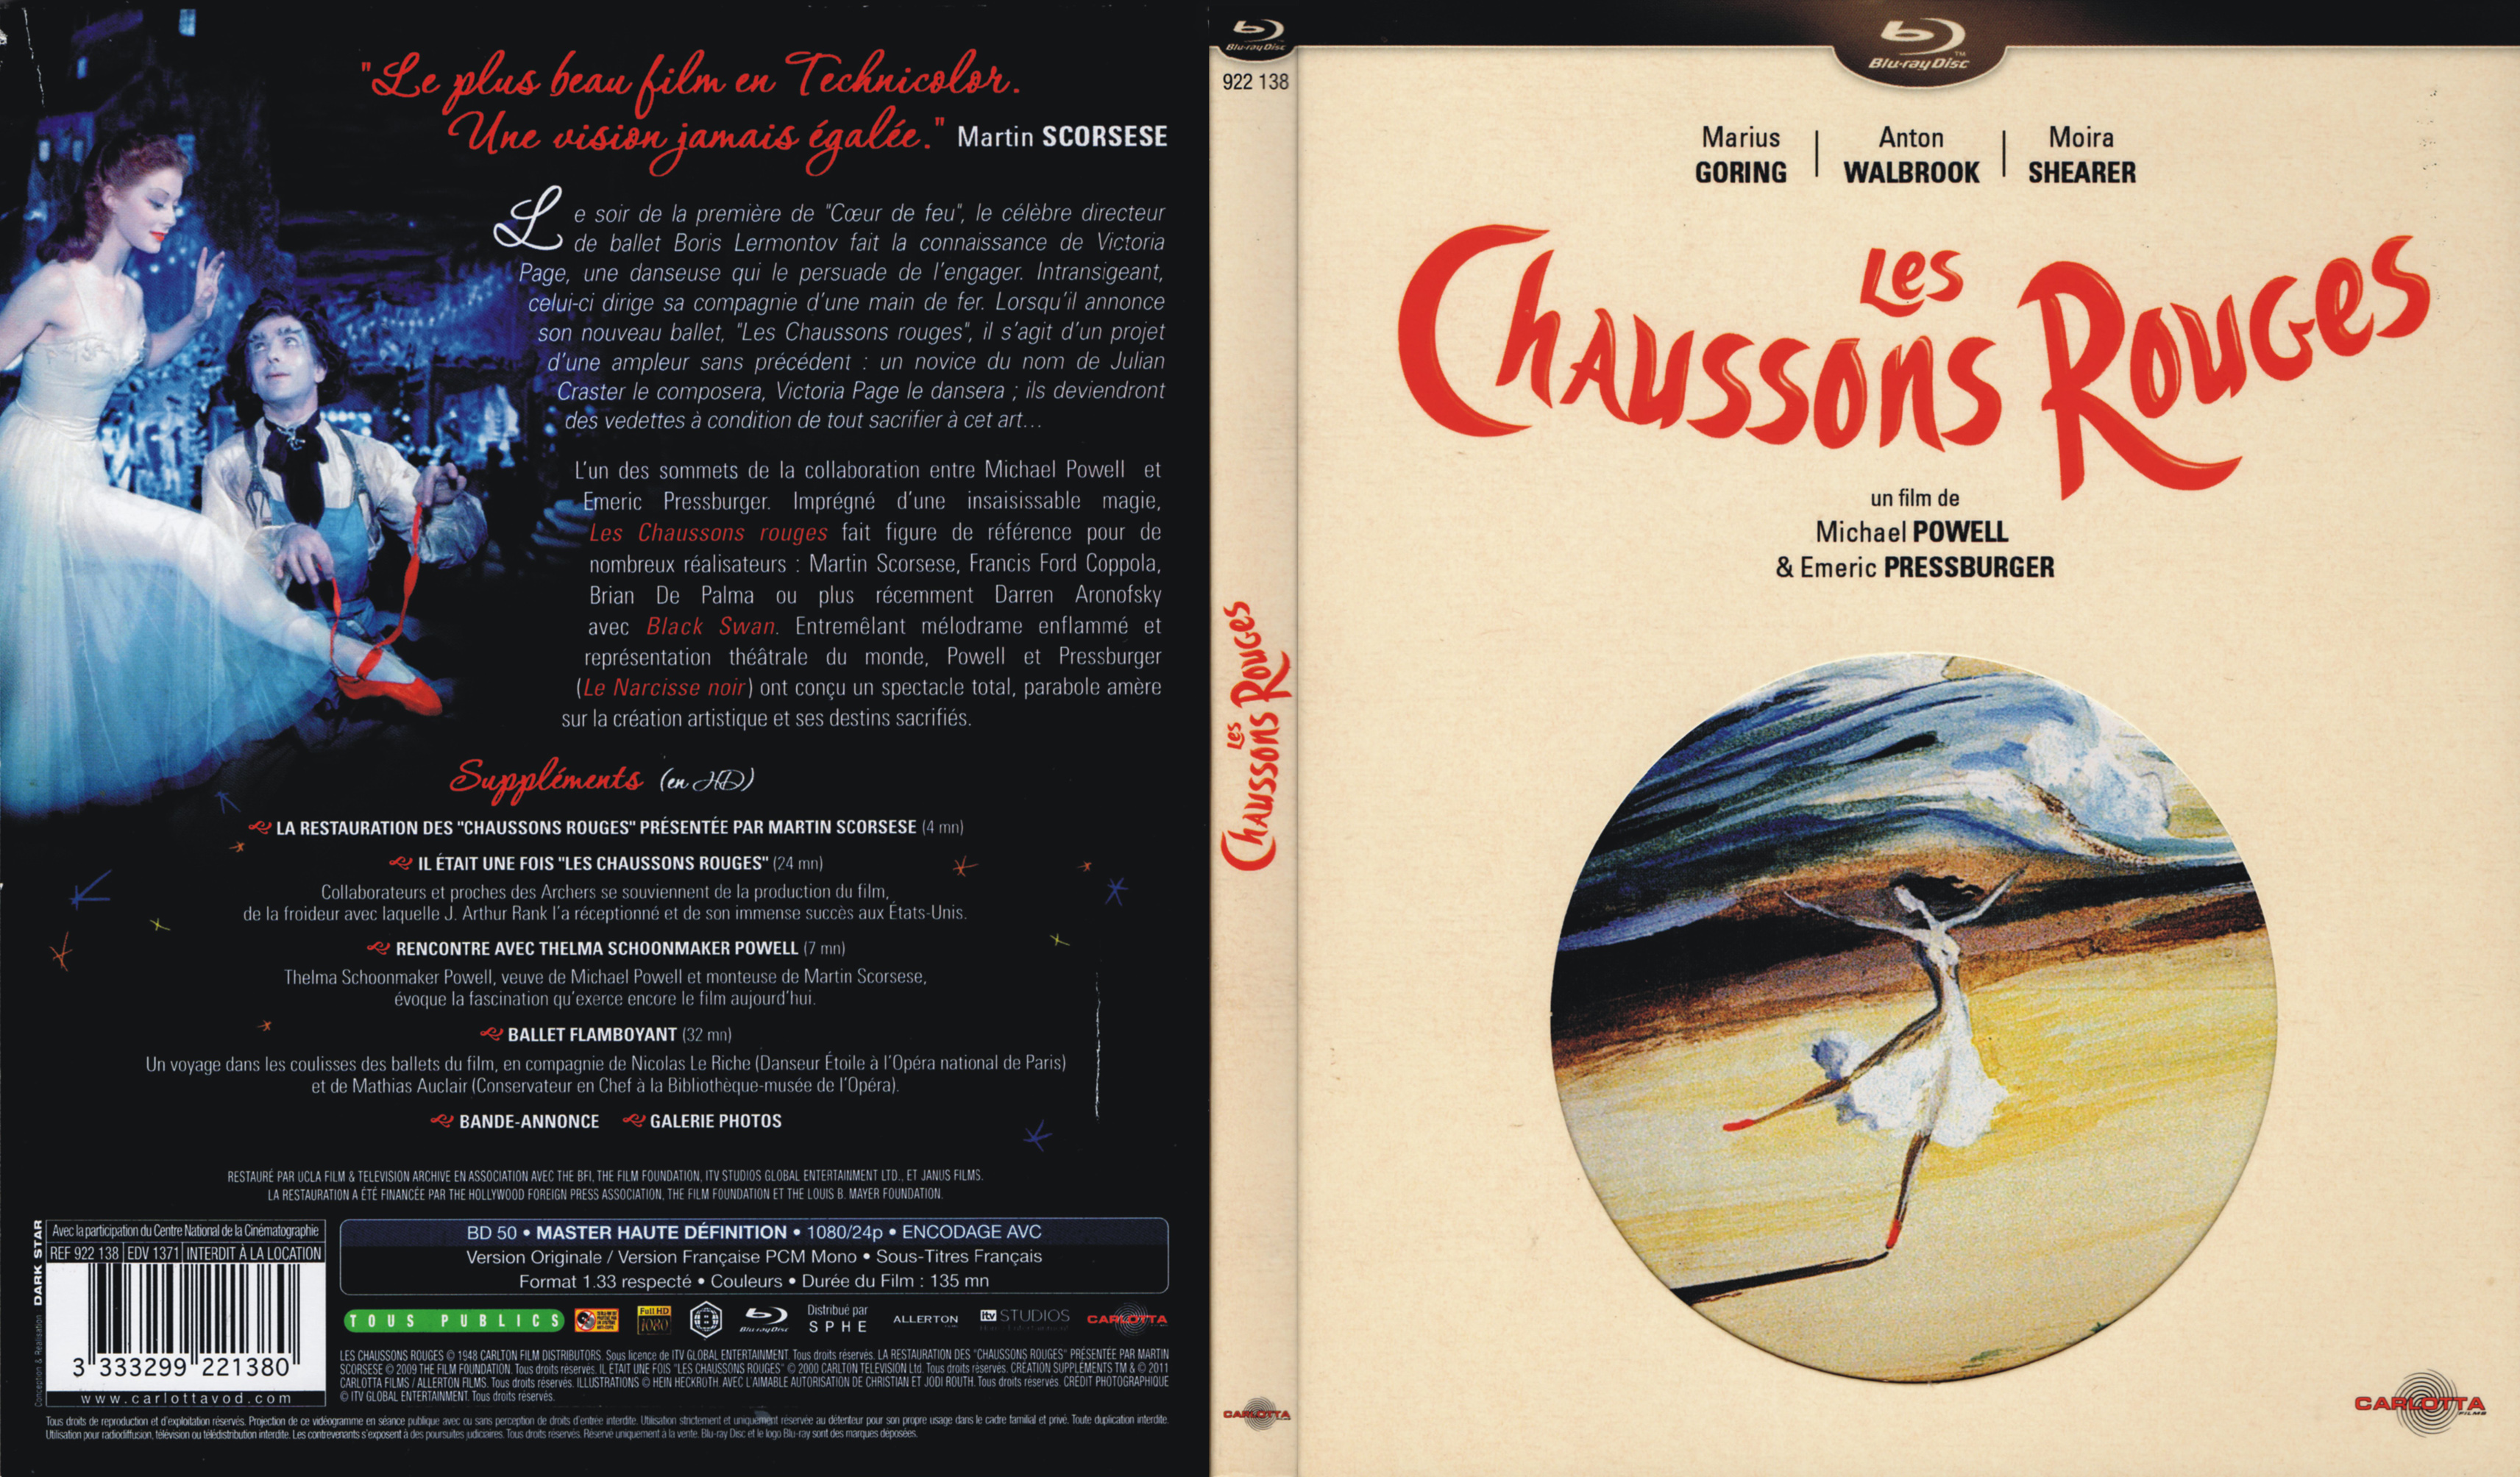 Jaquette DVD Les chaussons rouges (BLU-RAY)